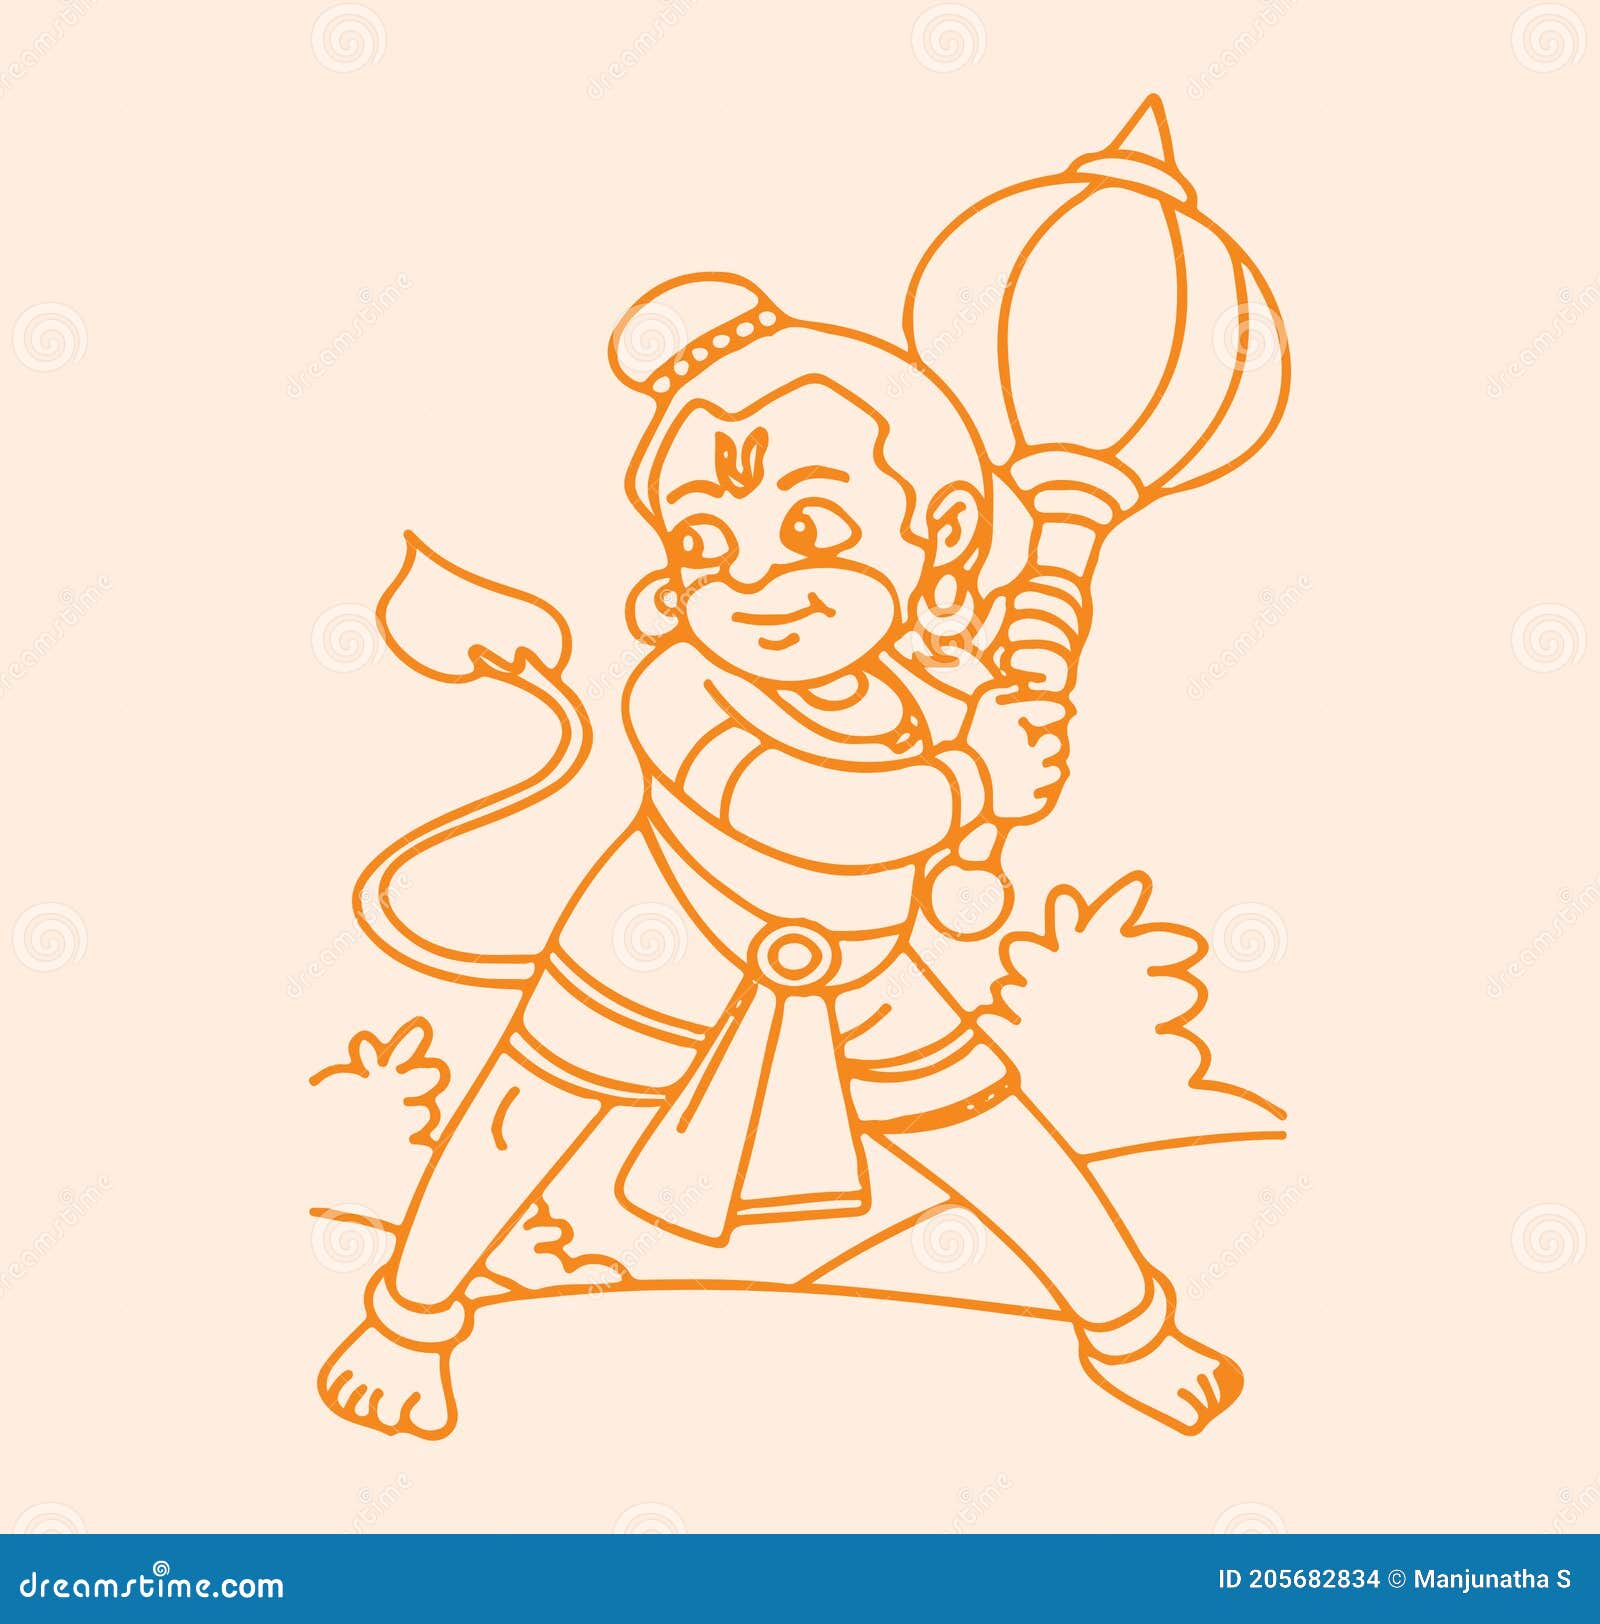 Sketch of Baby Hanuman with Gada or Mace Holding in Hand Outline Editable  Illustration Stock Vector - Illustration of india, drawing: 205682834